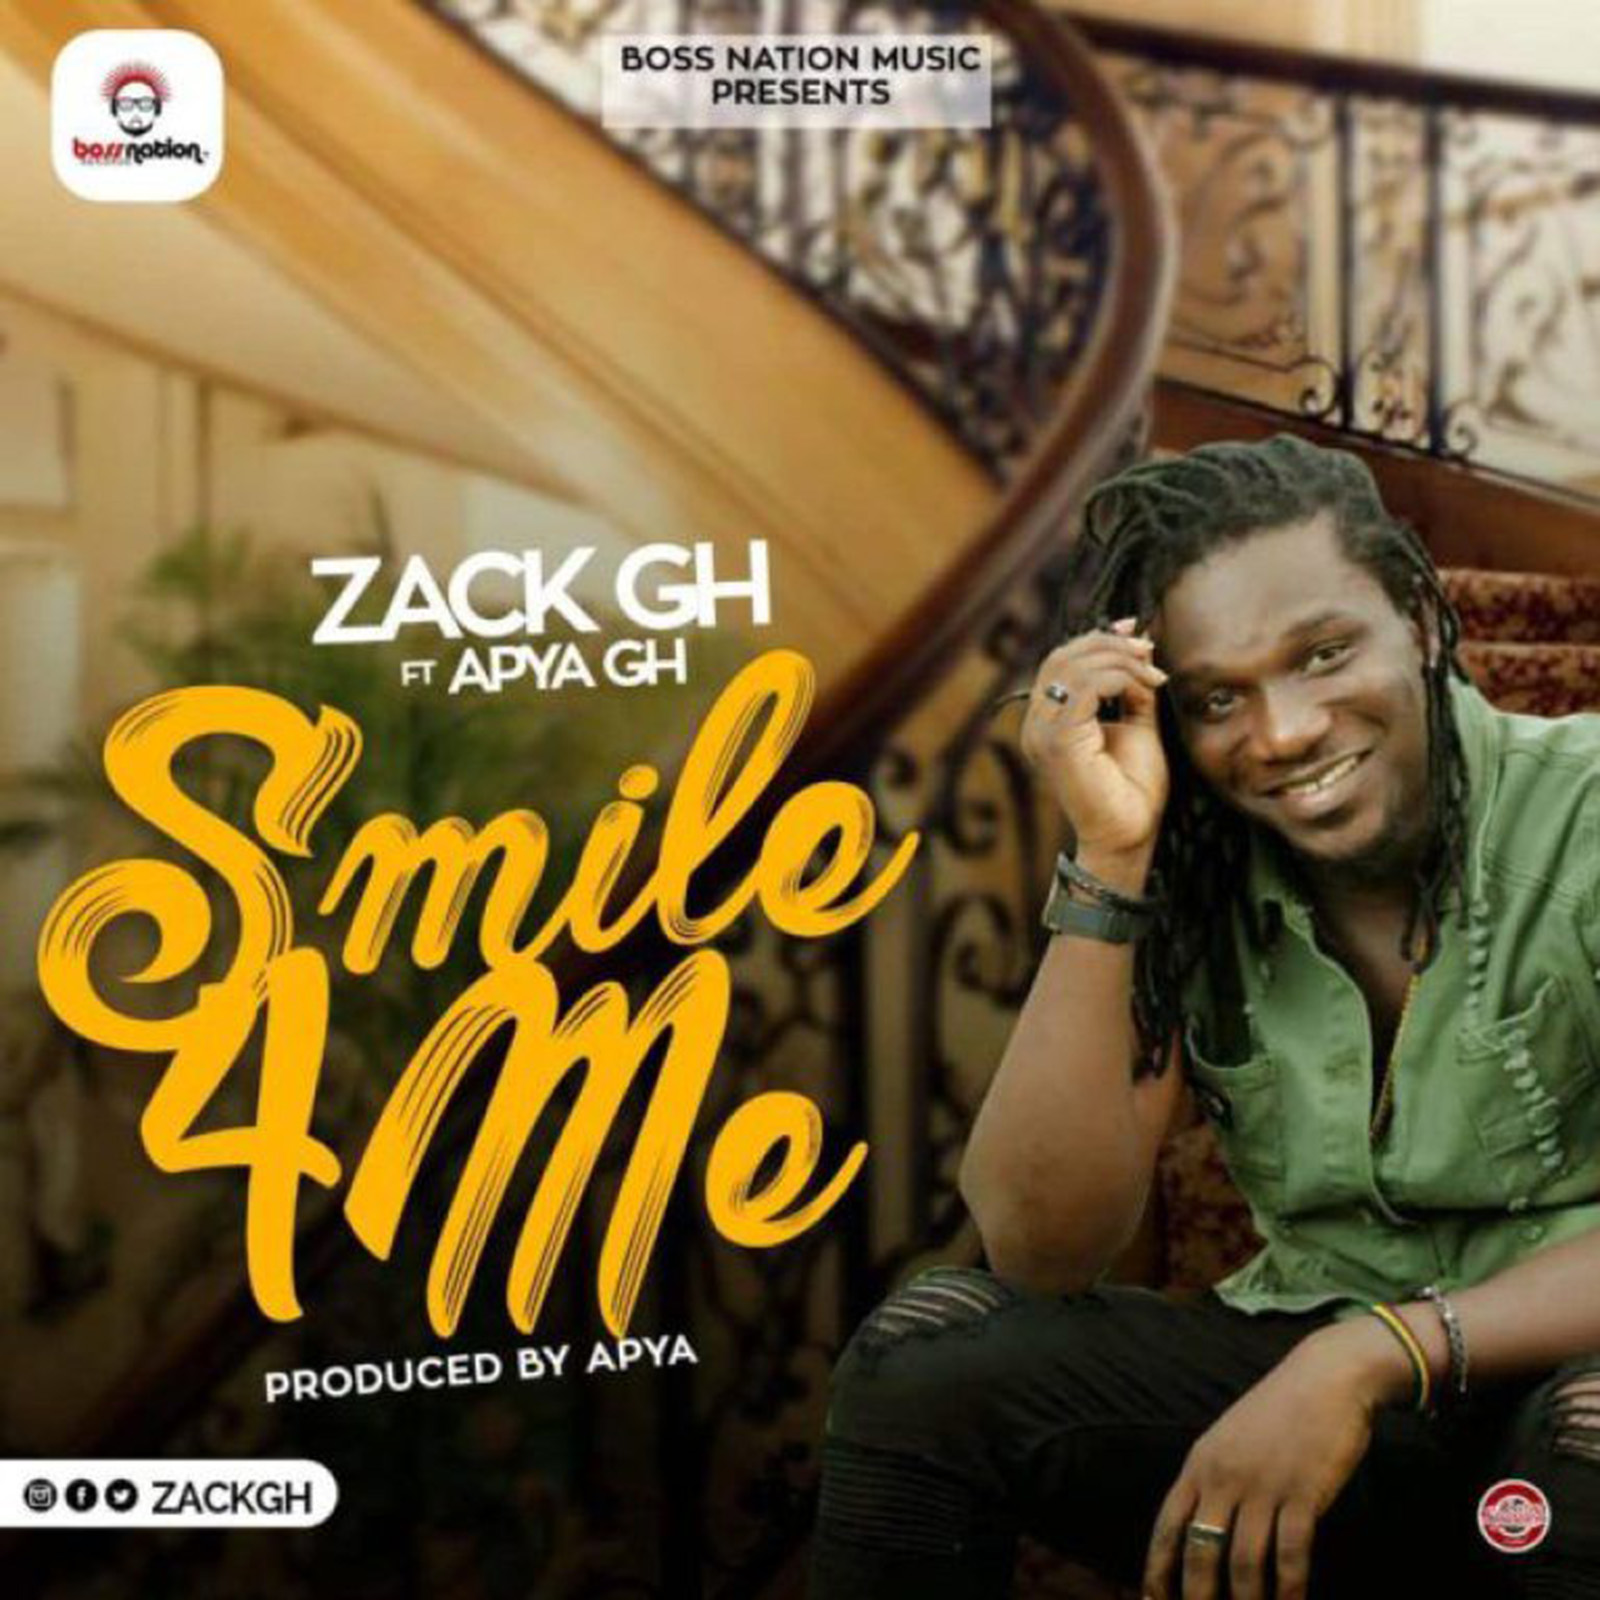 Smile For Me by Zack GH feat. Apya